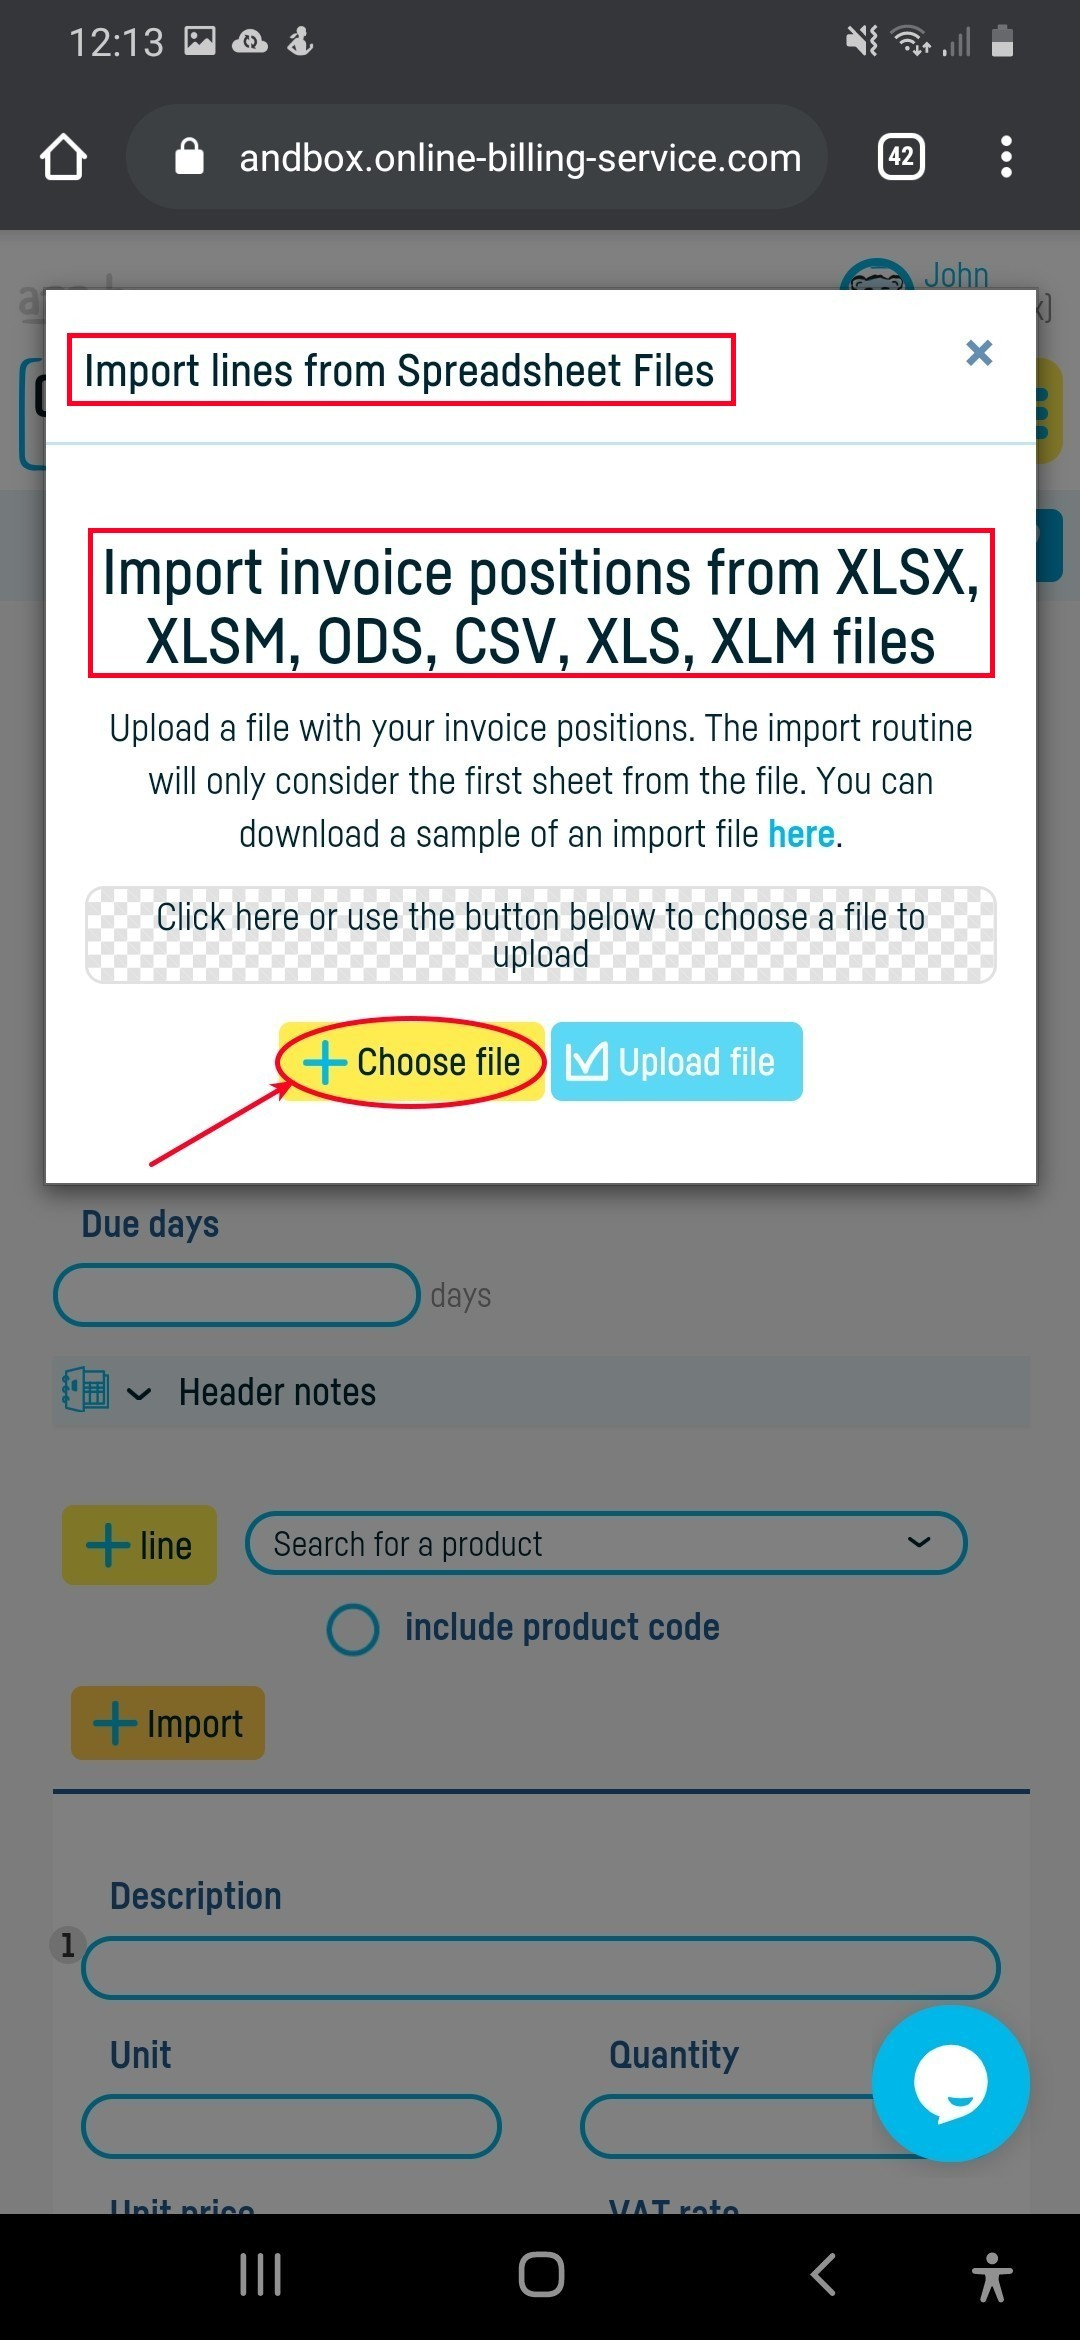 Import lines from documents into your invoice - step 2